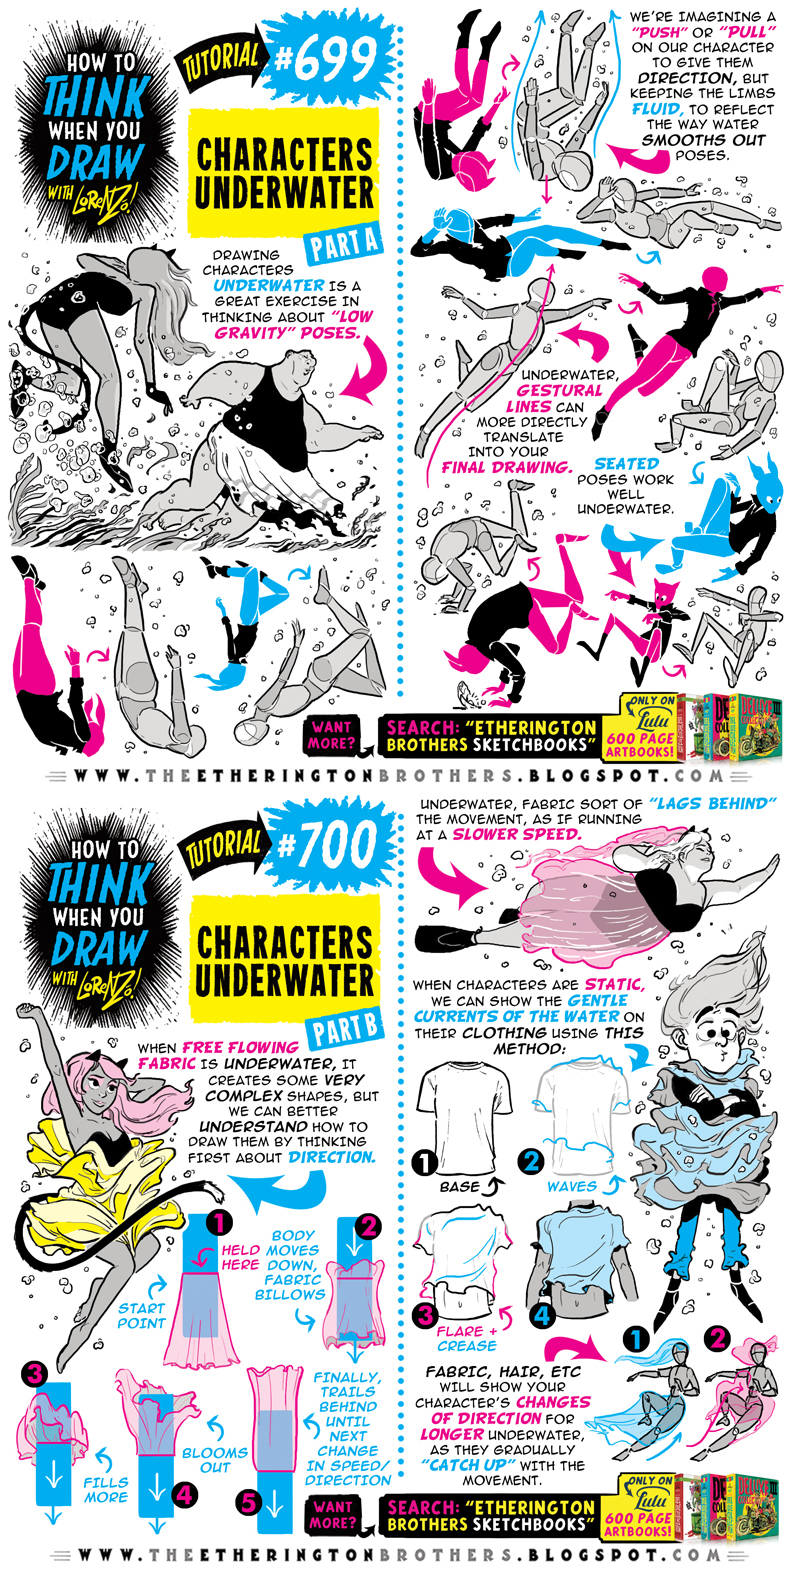 How to THINK when you draw CHARACTERS UNDERWATER! by